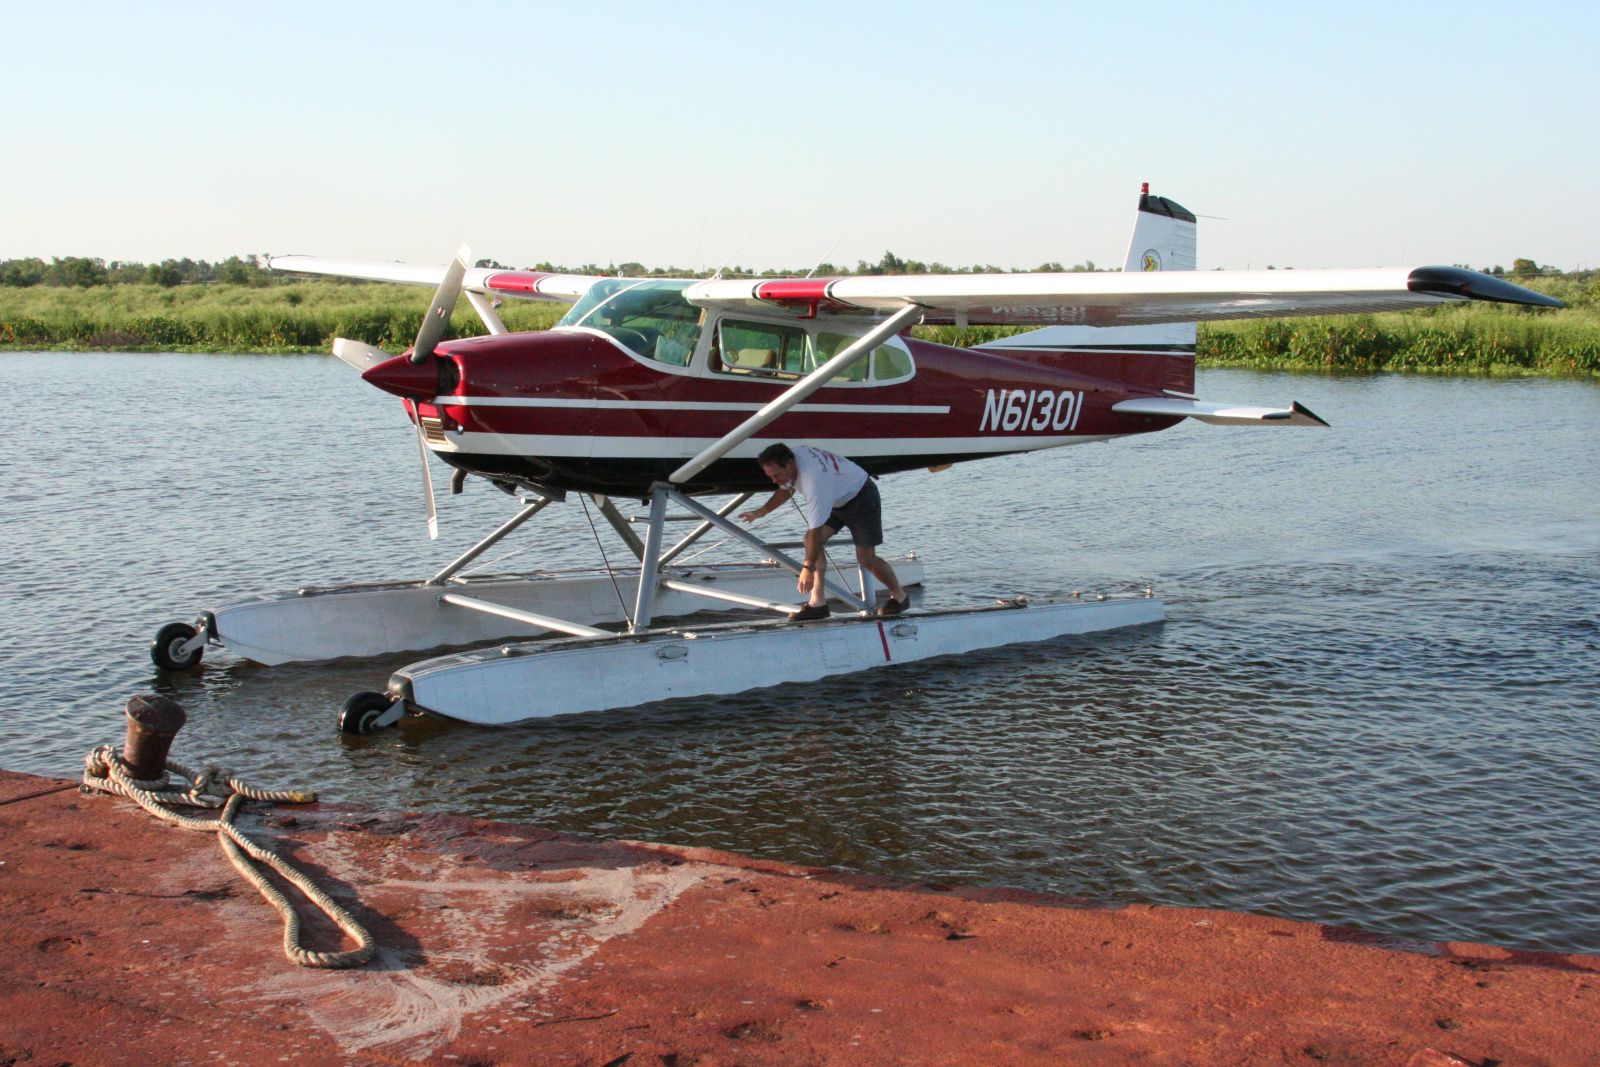 Picture of a pilot docking a seaplane.